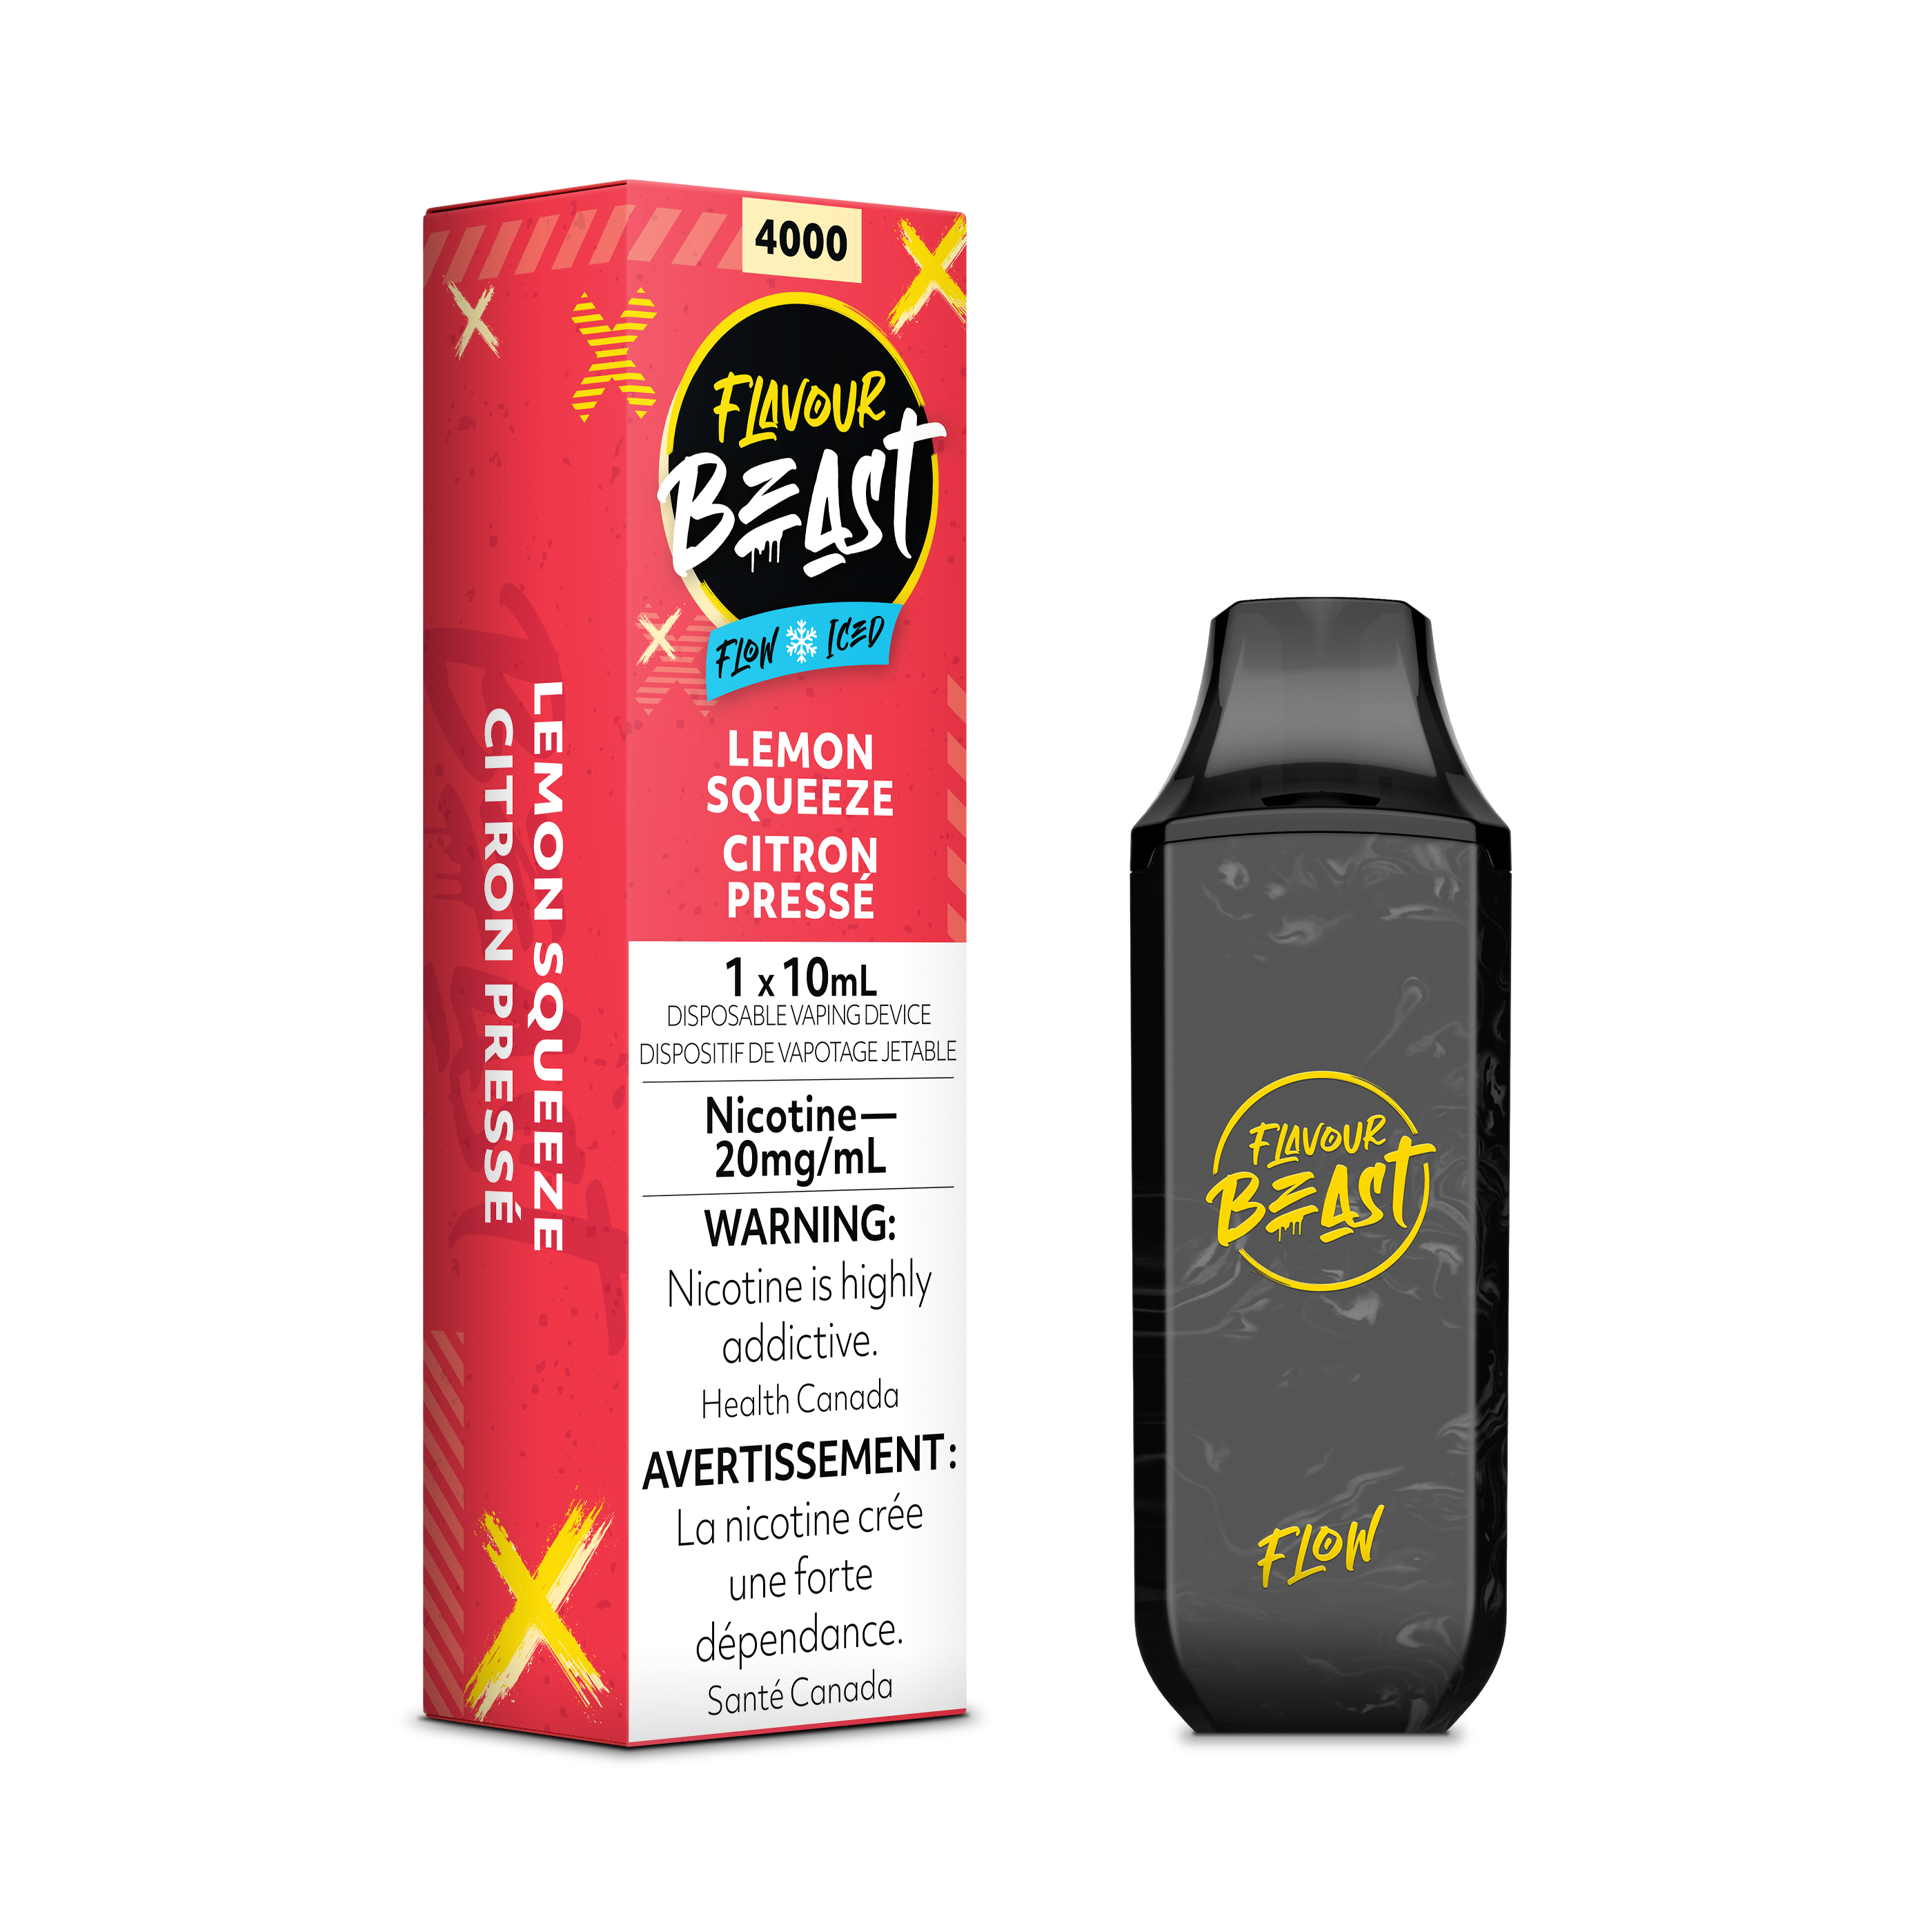 Lemon Squeeze Iced - Flavour Beast Flow 4000 - EXCISED